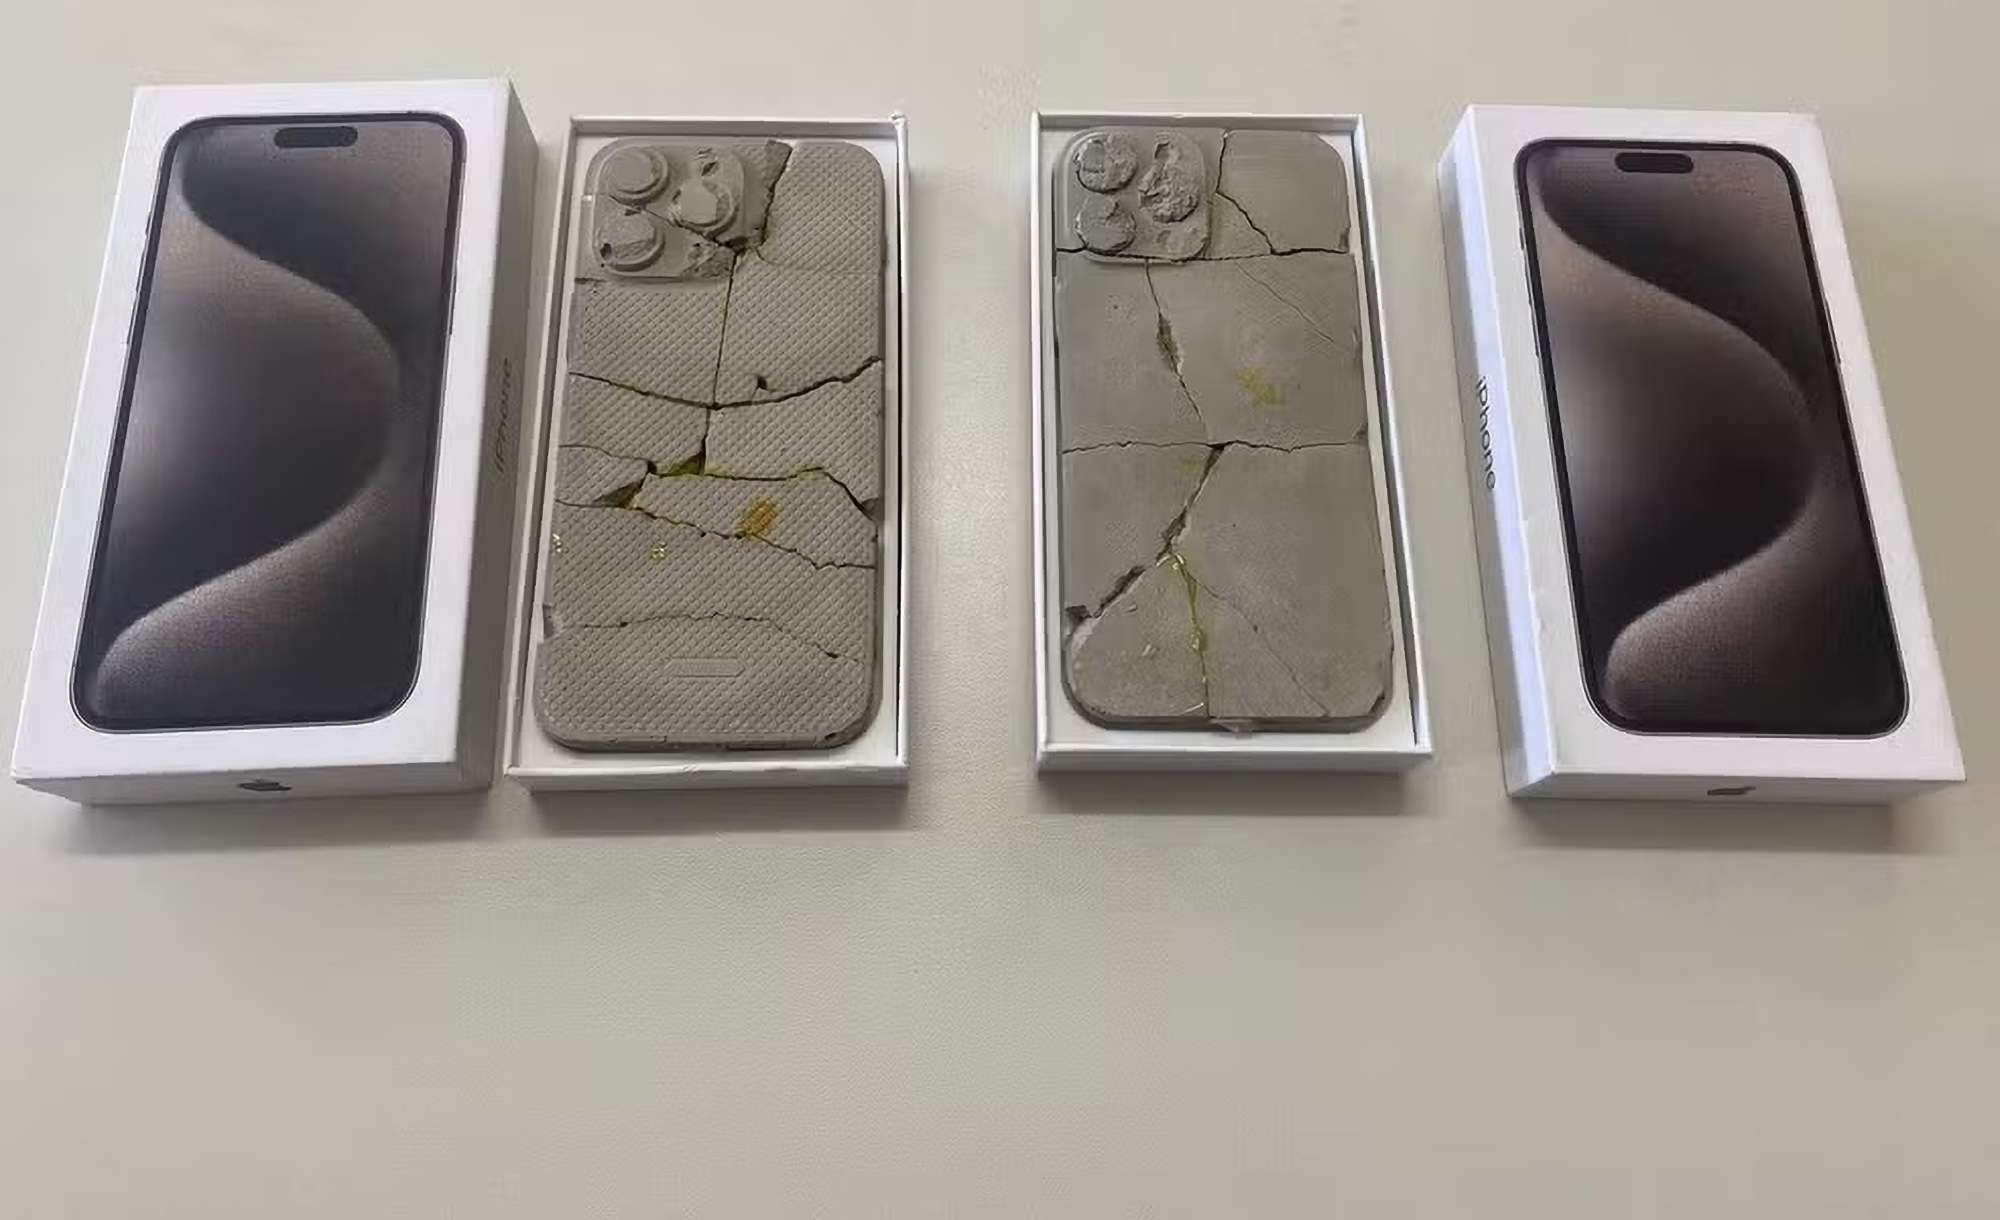 Influencer Sold Fake iPhones Made Of Mud For GBP 2,000